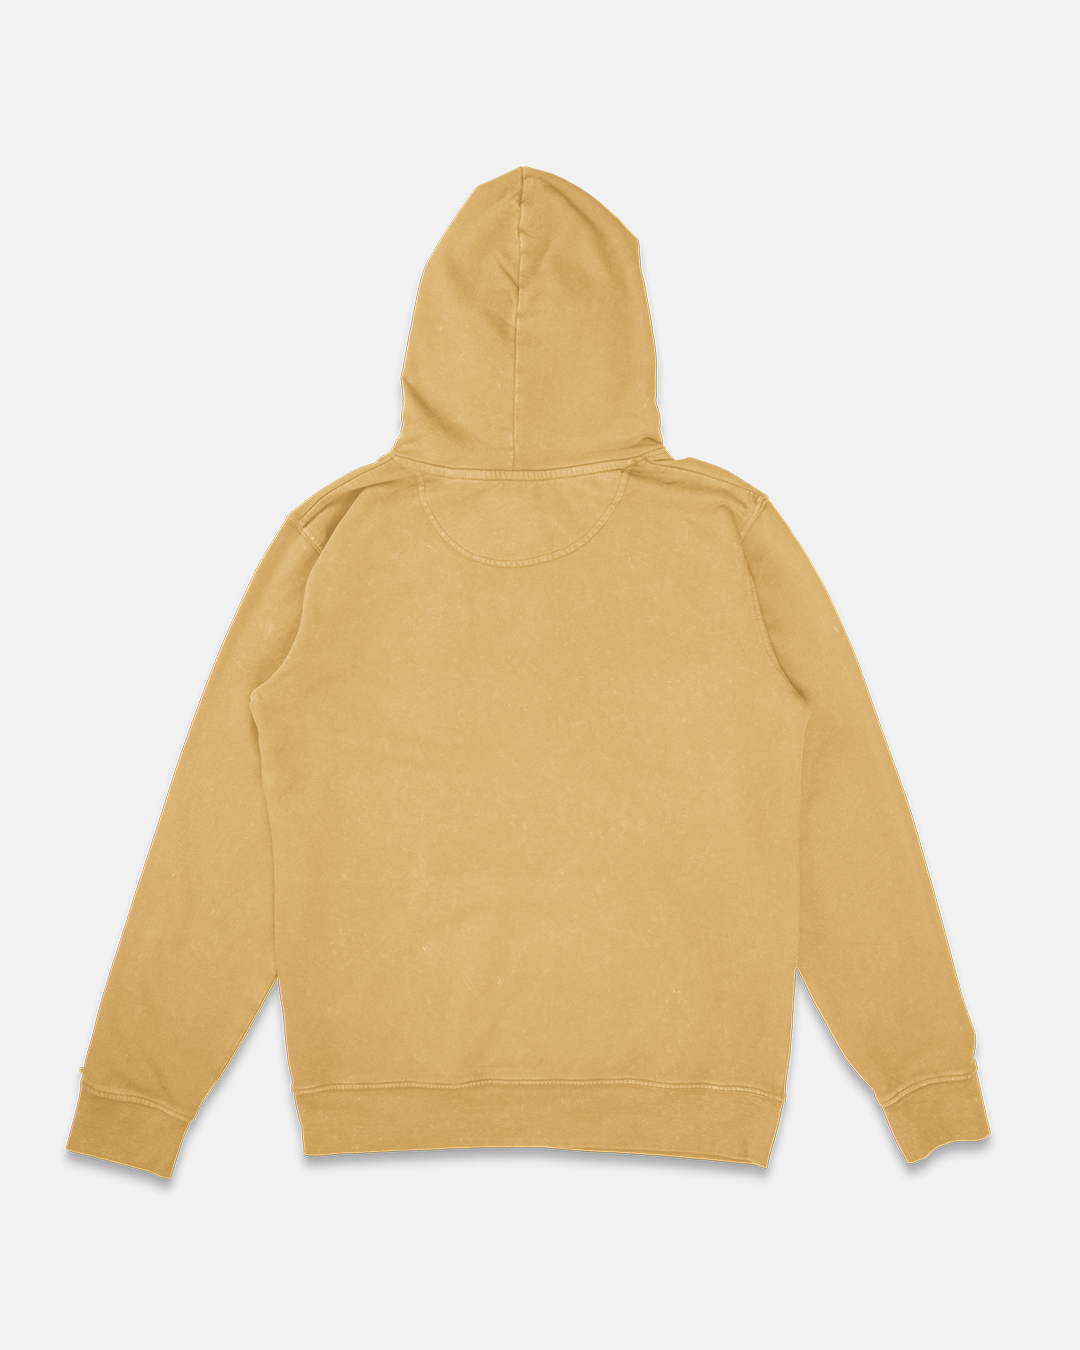 vetements surf salty smile VINTAGE HOODIE OCHRE (WASHED) marque eco responsable coton bio